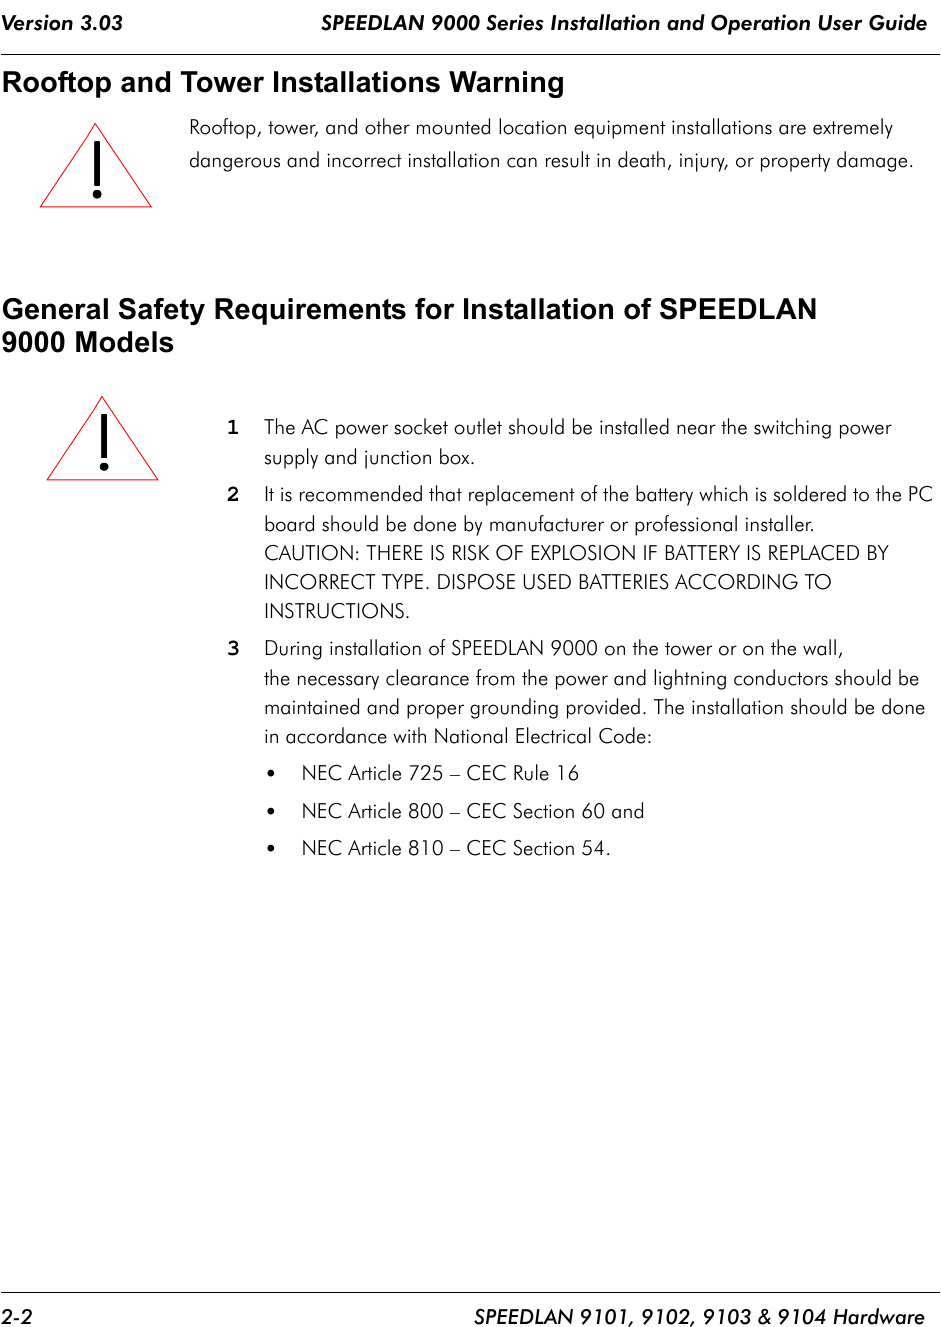 Version 3.03                                SPEEDLAN 9000 Series Installation and Operation User Guide 2-2 SPEEDLAN 9101, 9102, 9103 &amp; 9104 HardwareRooftop and Tower Installations Warning Rooftop, tower, and other mounted location equipment installations are extremely dangerous and incorrect installation can result in death, injury, or property damage.General Safety Requirements for Installation of SPEEDLAN 9000 Models1The AC power socket outlet should be installed near the switching power supply and junction box.2It is recommended that replacement of the battery which is soldered to the PC board should be done by manufacturer or professional installer. CAUTION: THERE IS RISK OF EXPLOSION IF BATTERY IS REPLACED BY INCORRECT TYPE. DISPOSE USED BATTERIES ACCORDING TO INSTRUCTIONS.3During installation of SPEEDLAN 9000 on the tower or on the wall, the necessary clearance from the power and lightning conductors should be maintained and proper grounding provided. The installation should be done in accordance with National Electrical Code:•NEC Article 725 – CEC Rule 16•NEC Article 800 – CEC Section 60 and•NEC Article 810 – CEC Section 54.               !!!!!!!!